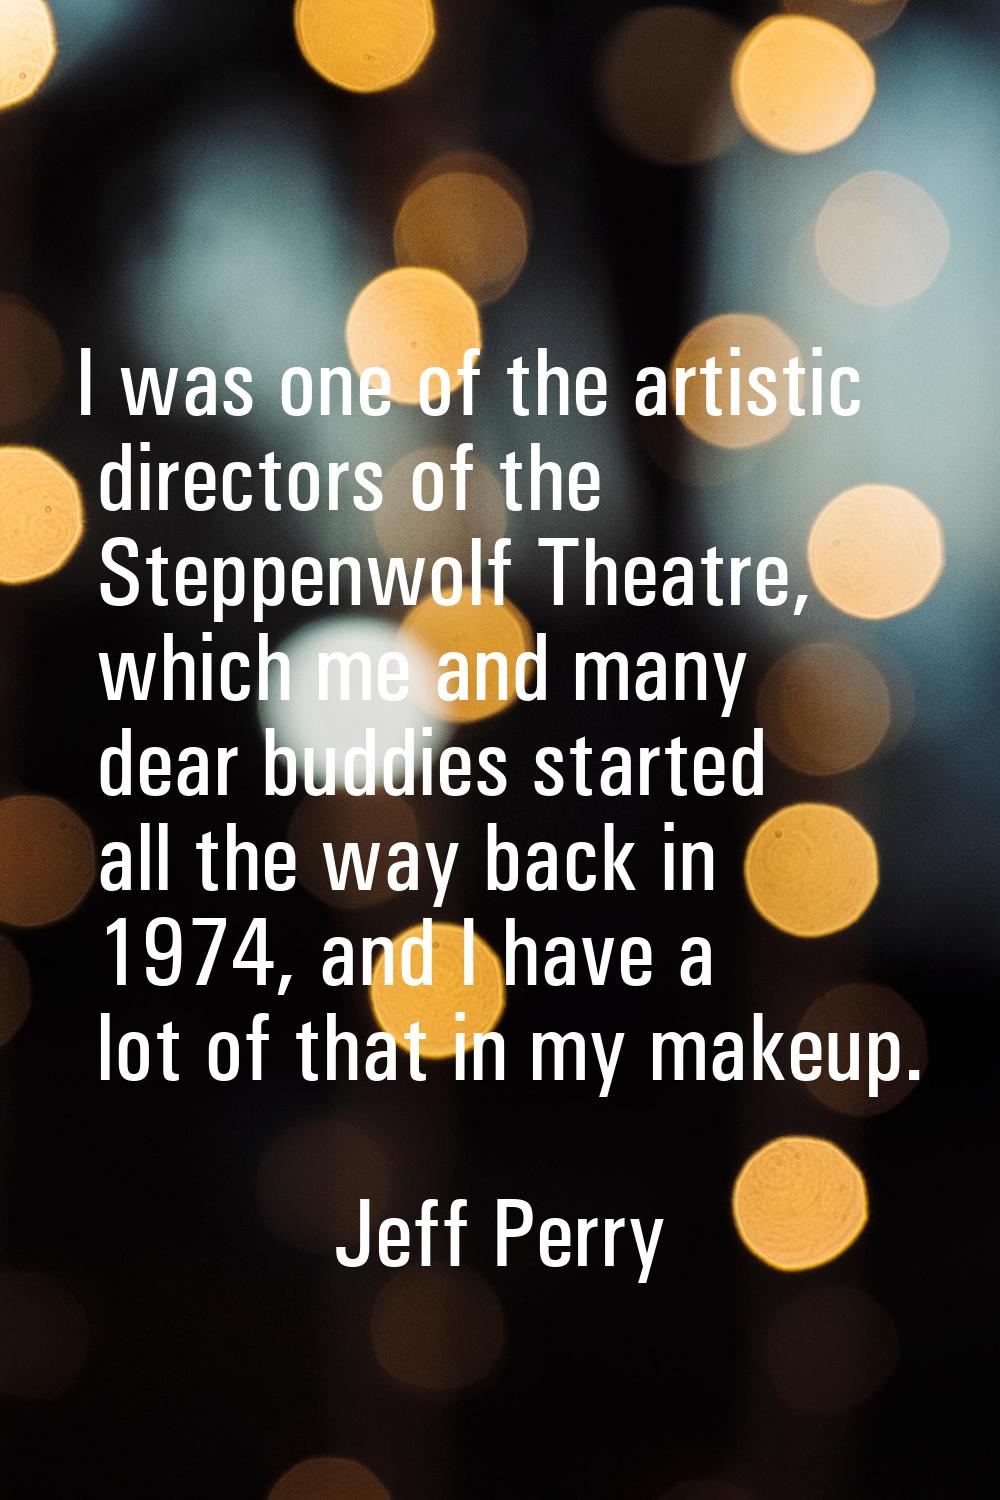 I was one of the artistic directors of the Steppenwolf Theatre, which me and many dear buddies star